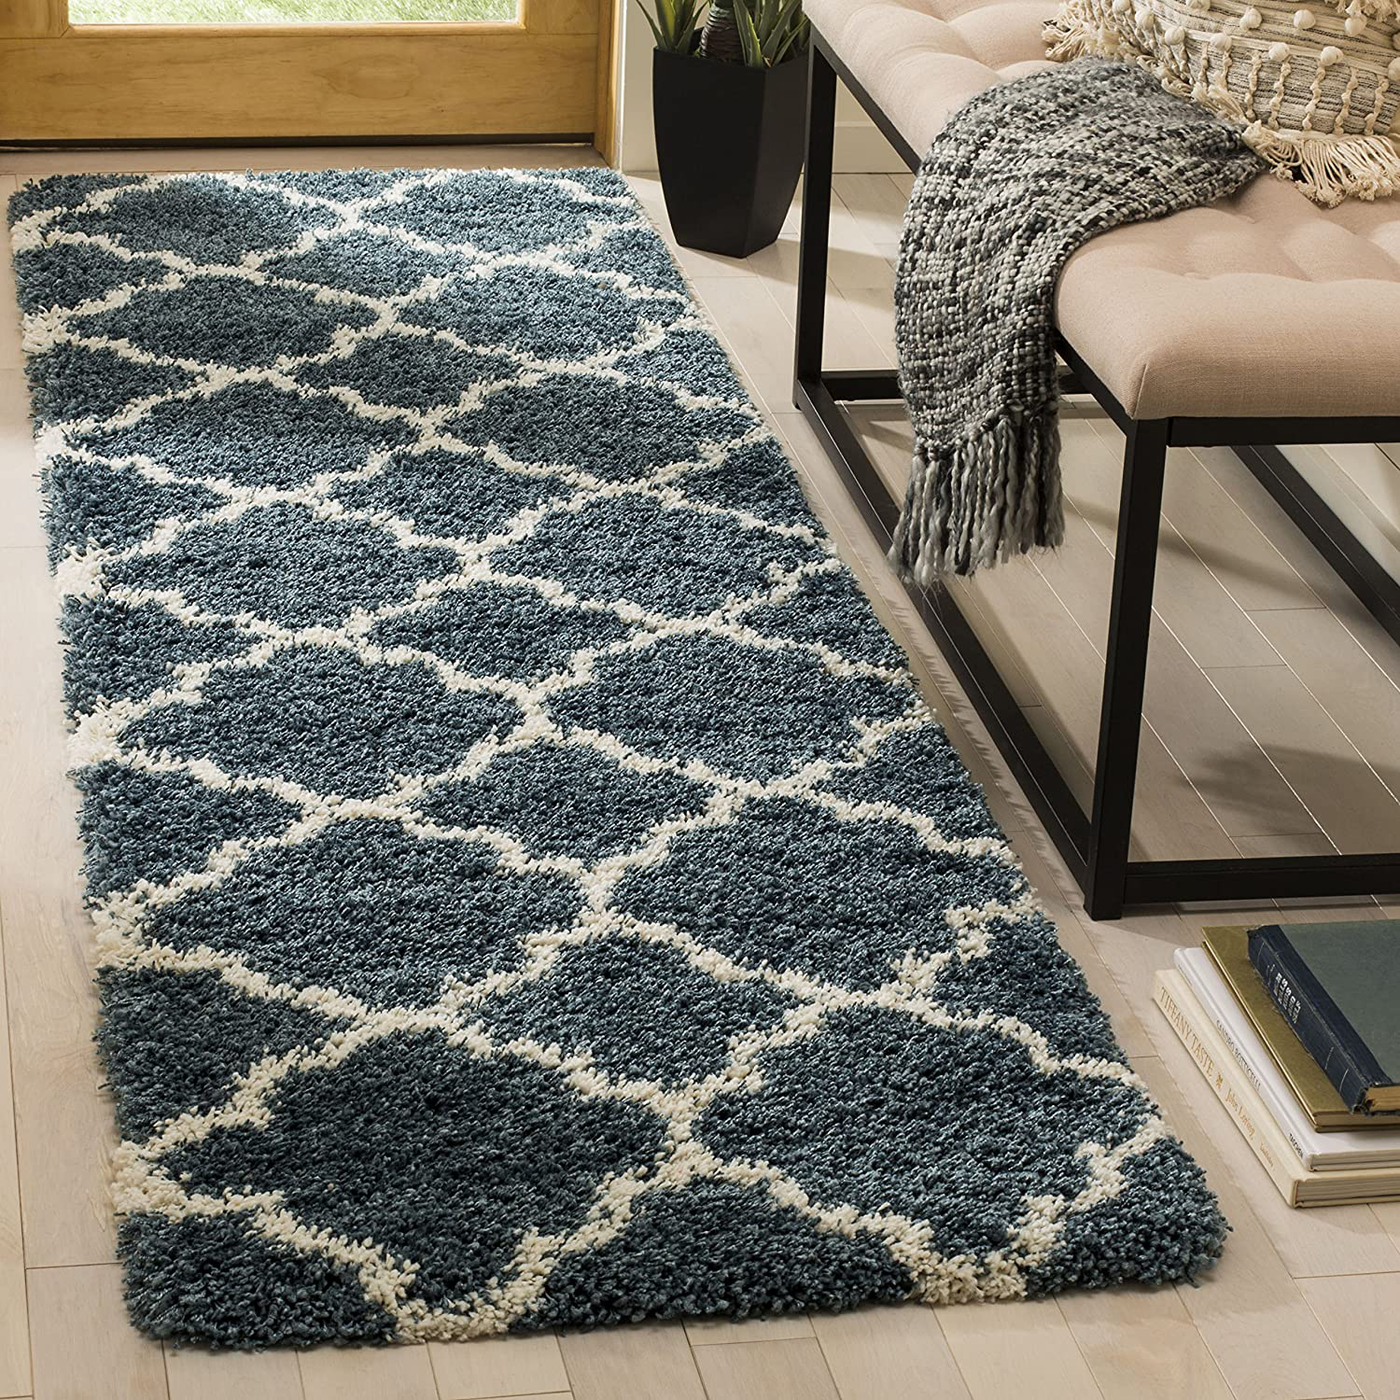 SAFAVIEH Hudson Shag Collection SGH282L Moroccan Trellis Non-Shedding Living Room Bedroom Dining Room Entryway Plush 2-inch Thick Runner, 2'3" x 12' , Slate Blue / Ivory